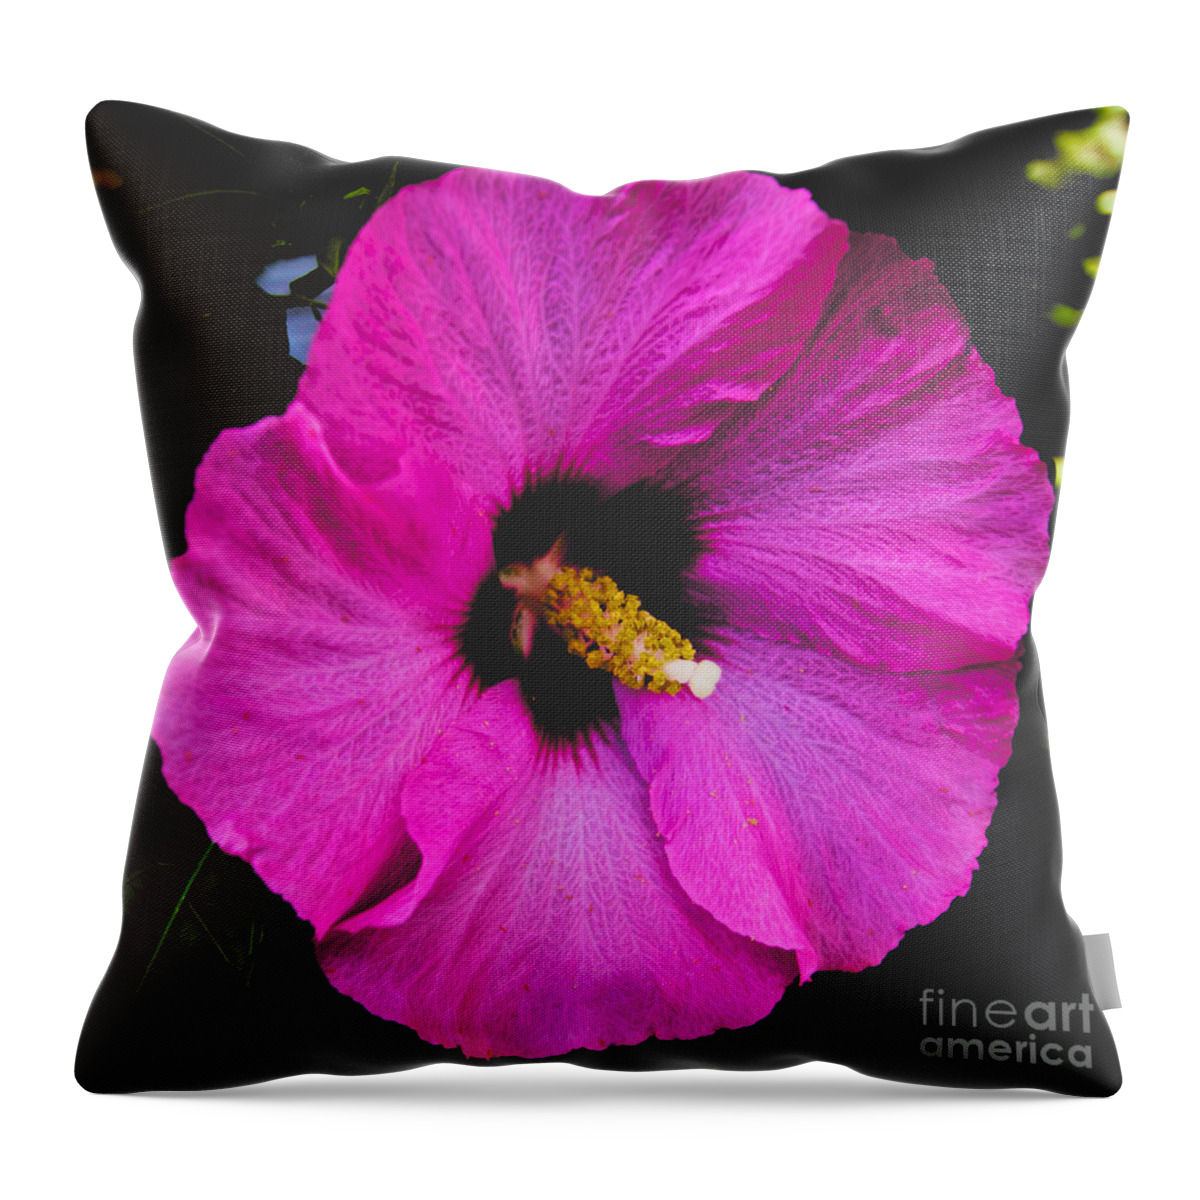 Pink Flower Throw Pillow featuring the photograph Pink Flower by William Norton